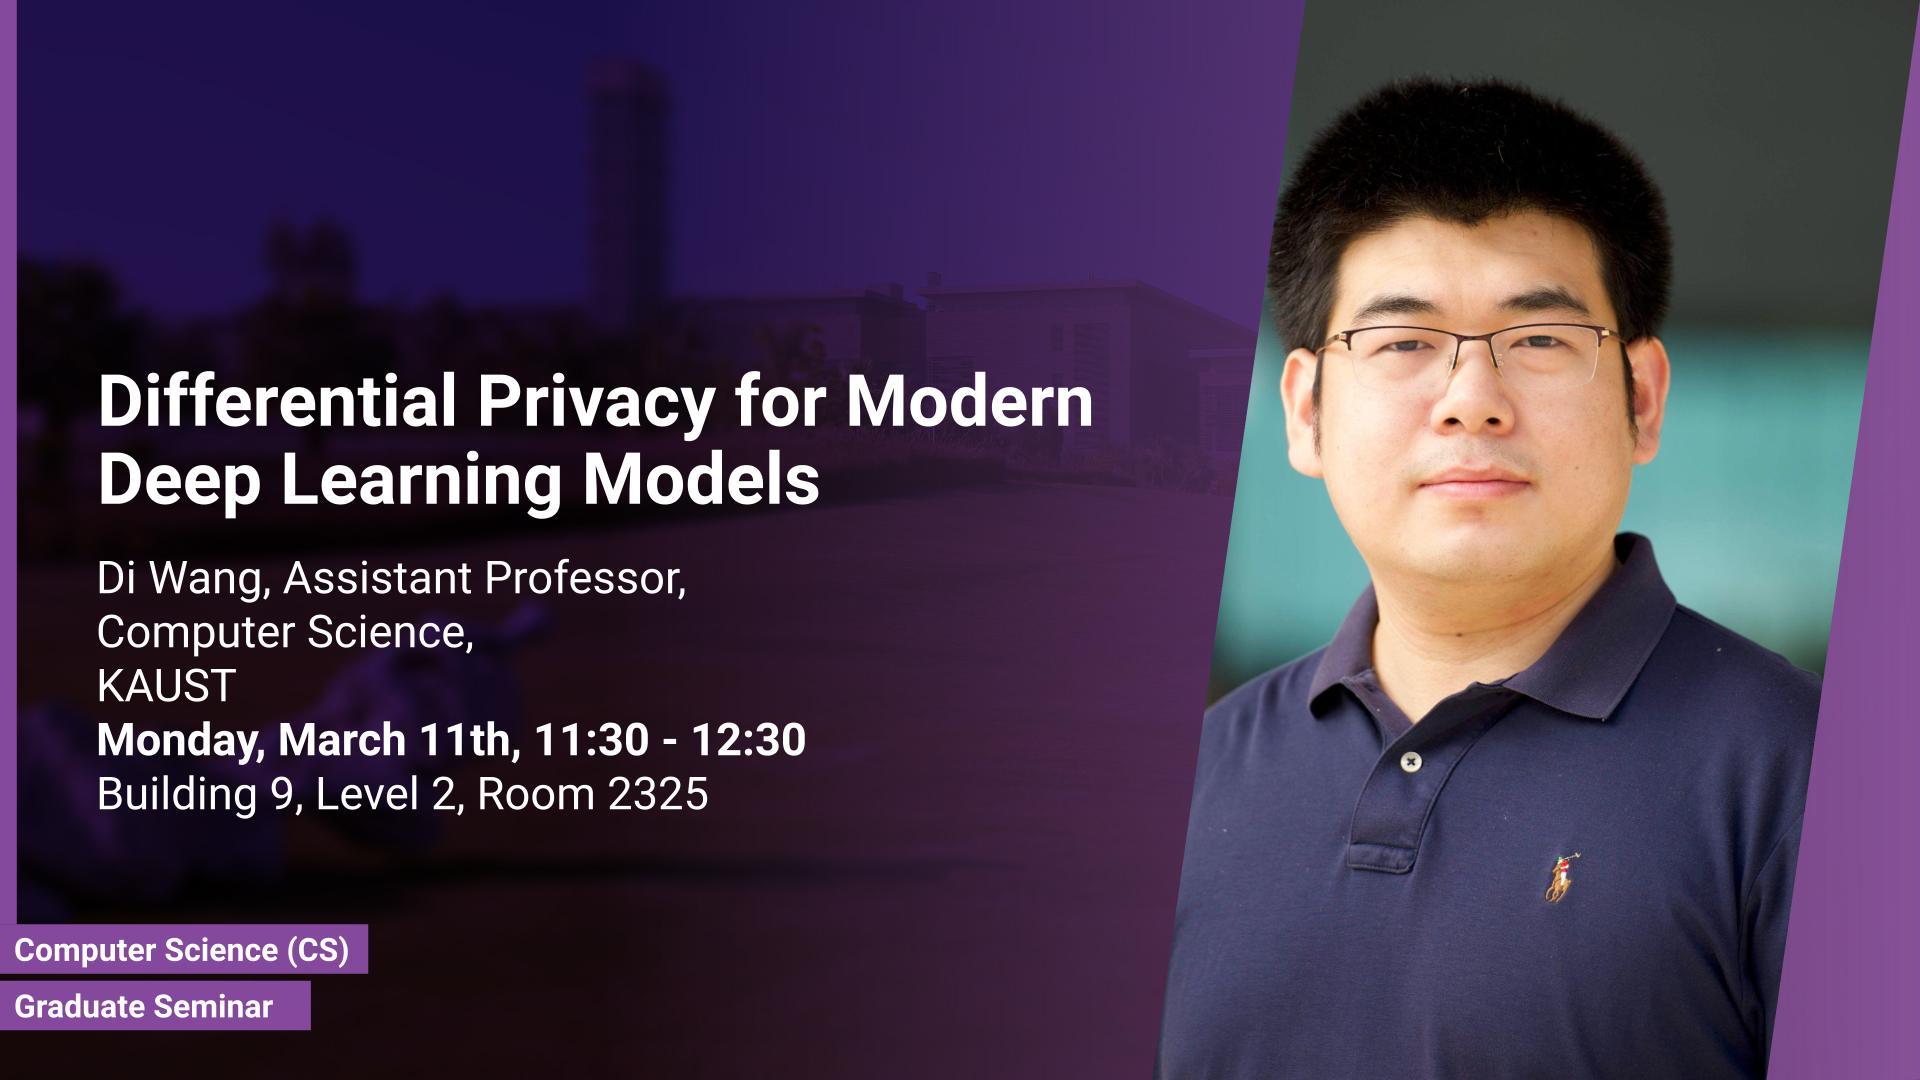 KAUST-CEMSE-CS-Graduate-Seminar-Di Wang-Differential Privacy for Modern Deep Learning Models .jpg